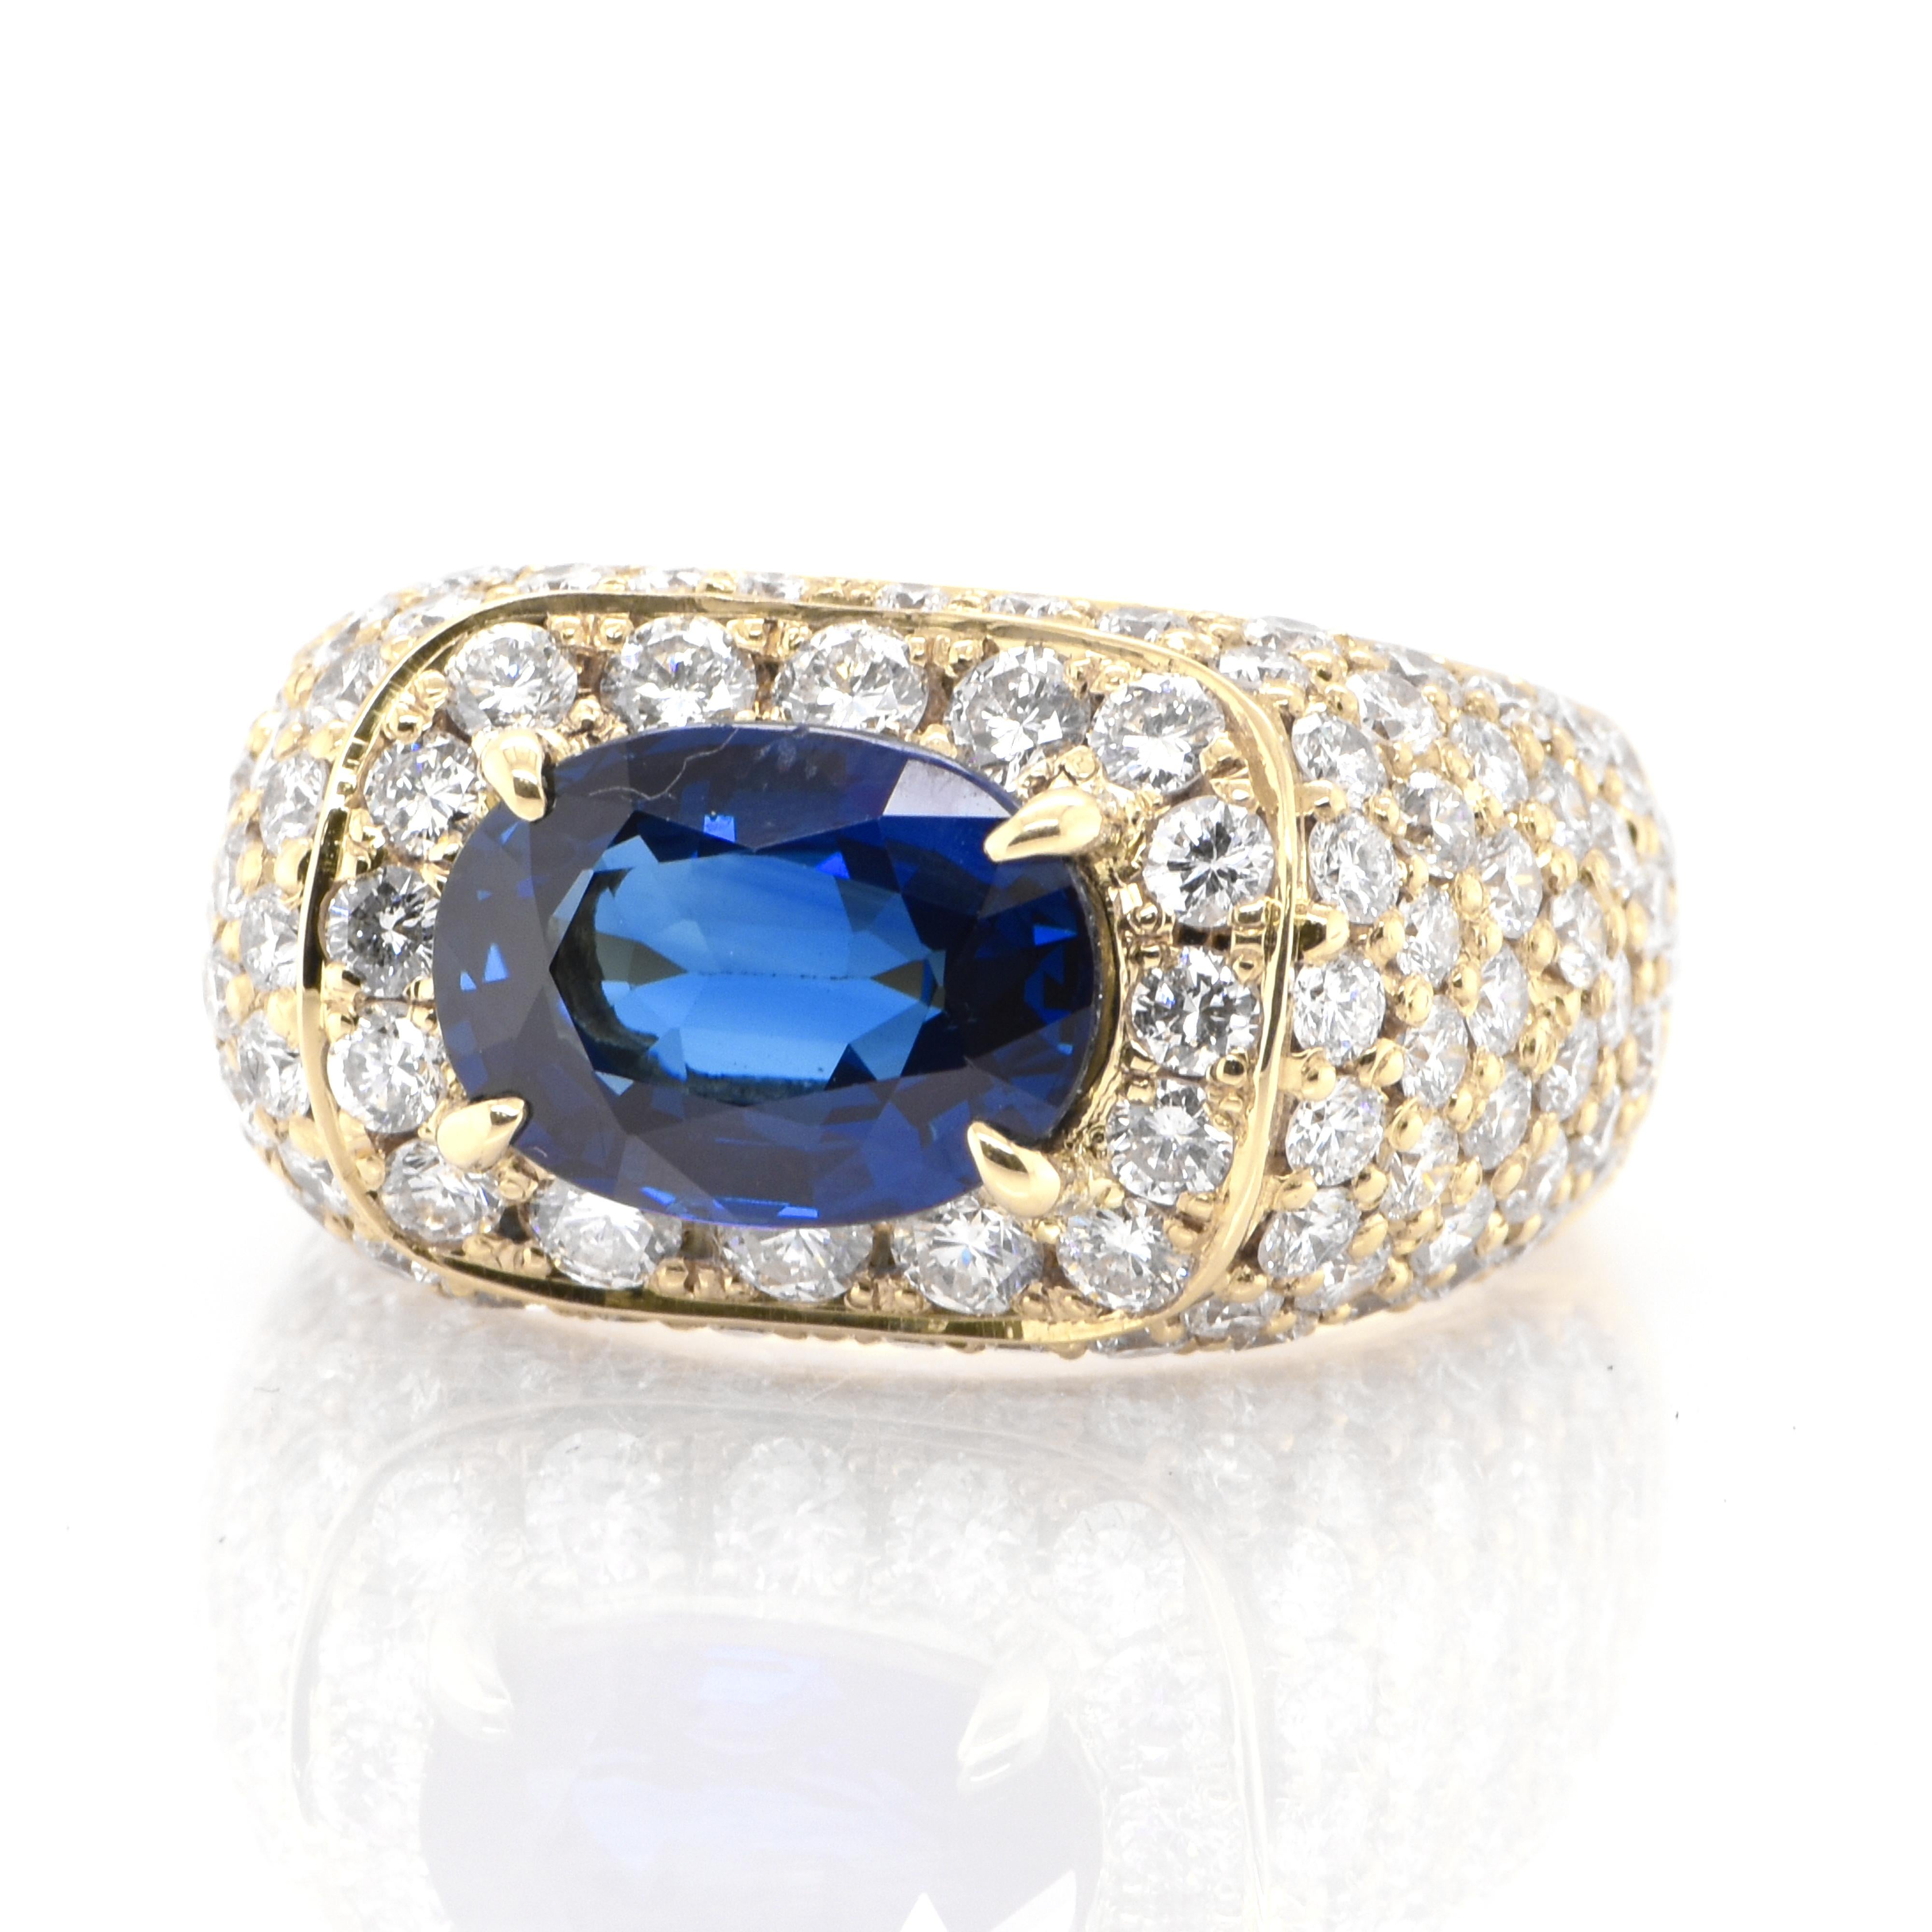 A beautiful ring featuring 3.47 Carat Natural Sapphire and 2.73 Carats Diamond Accents set in 18 Karat Yellow Gold. Sapphires have extraordinary durability - they excel in hardness as well as toughness and durability making them very popular in